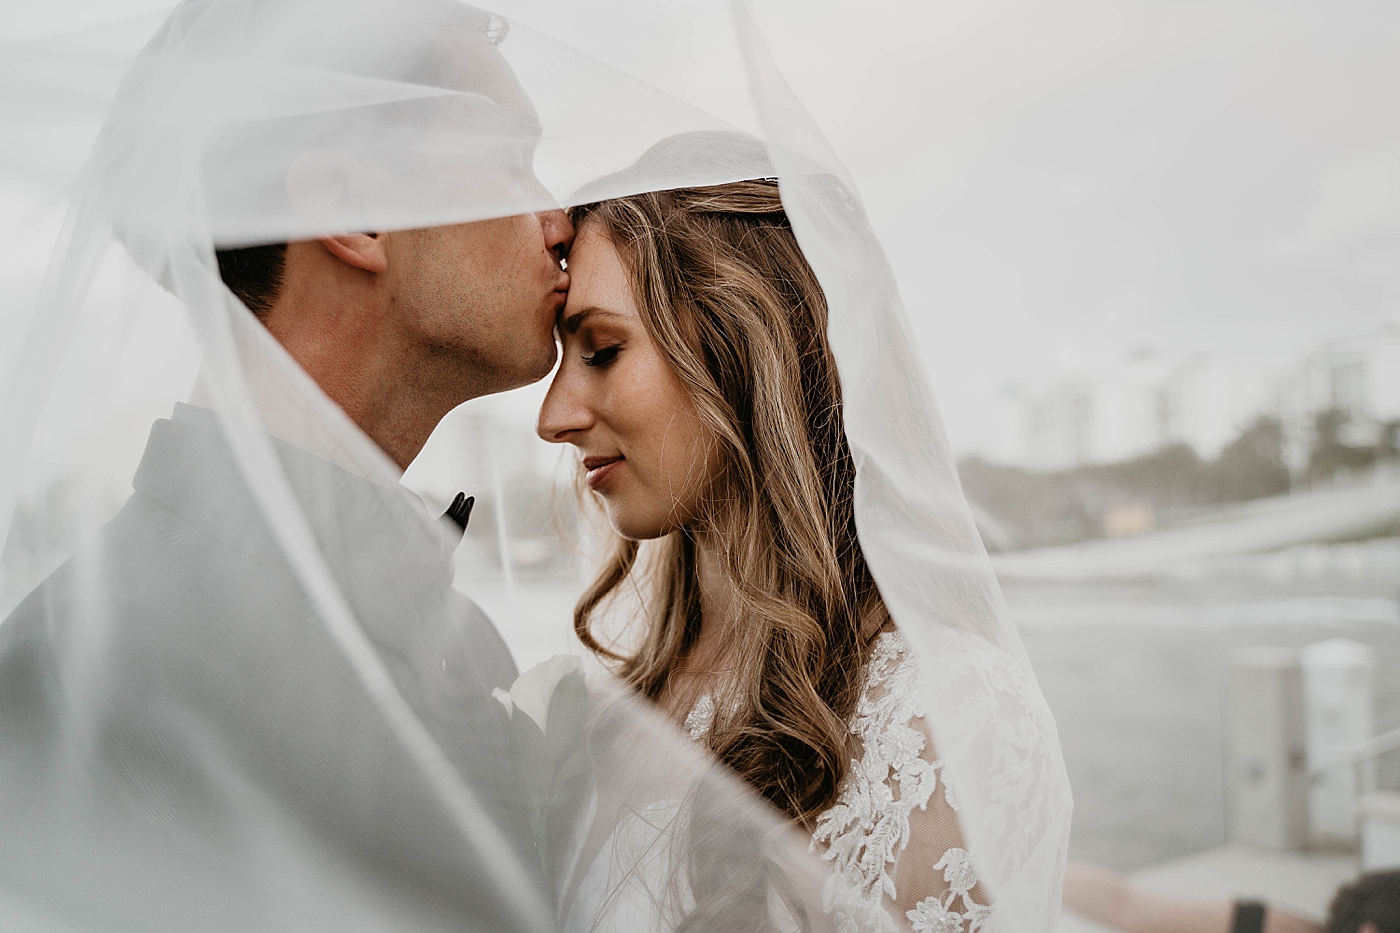 Bride and Groom under veil Waterstone Resort and Marina Wedding captured by South Florida Wedding Photographer Krystal Capone Photography